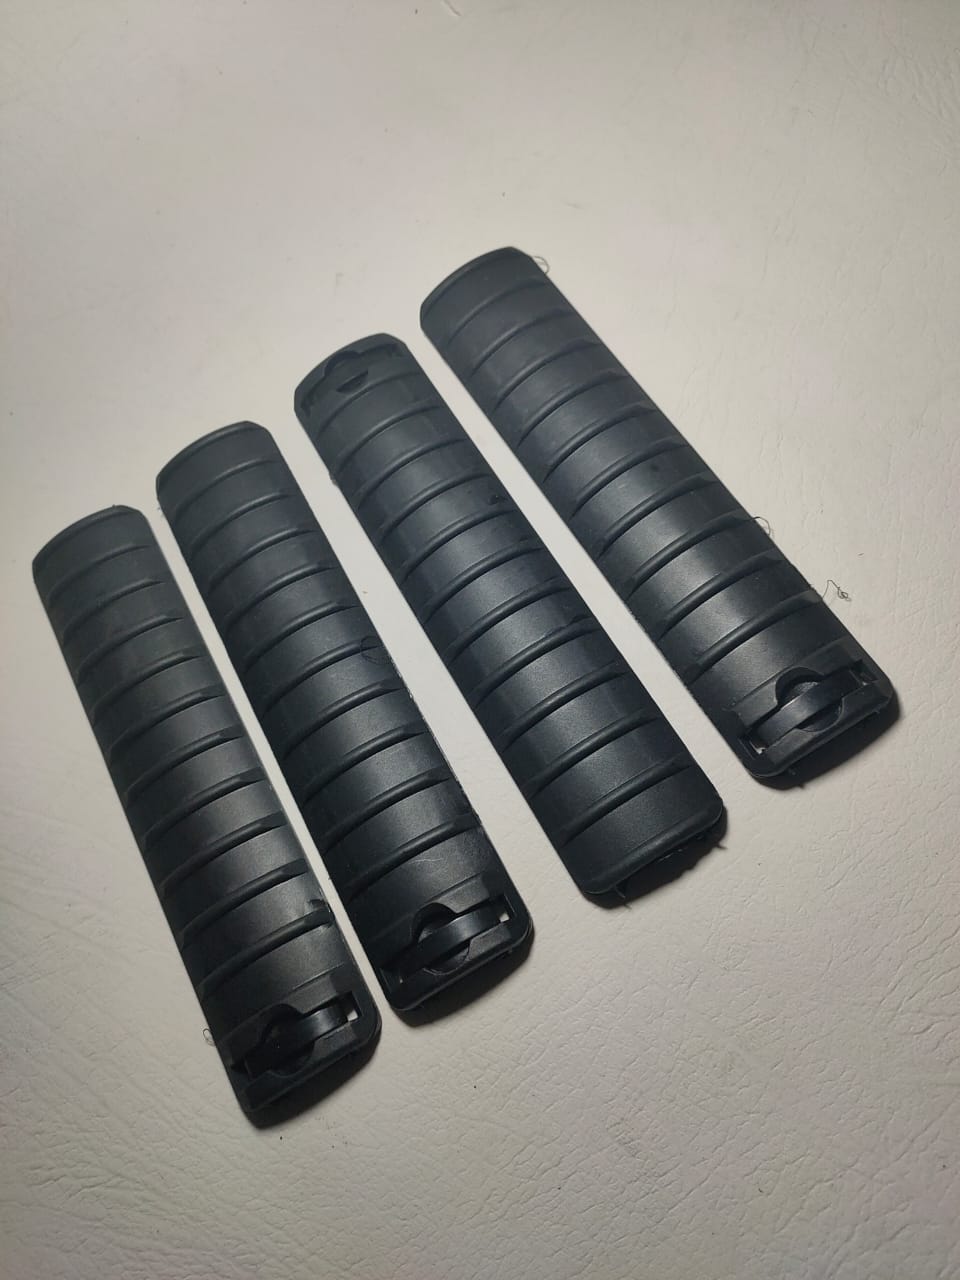 Picatinny Rail Covers For Handguards